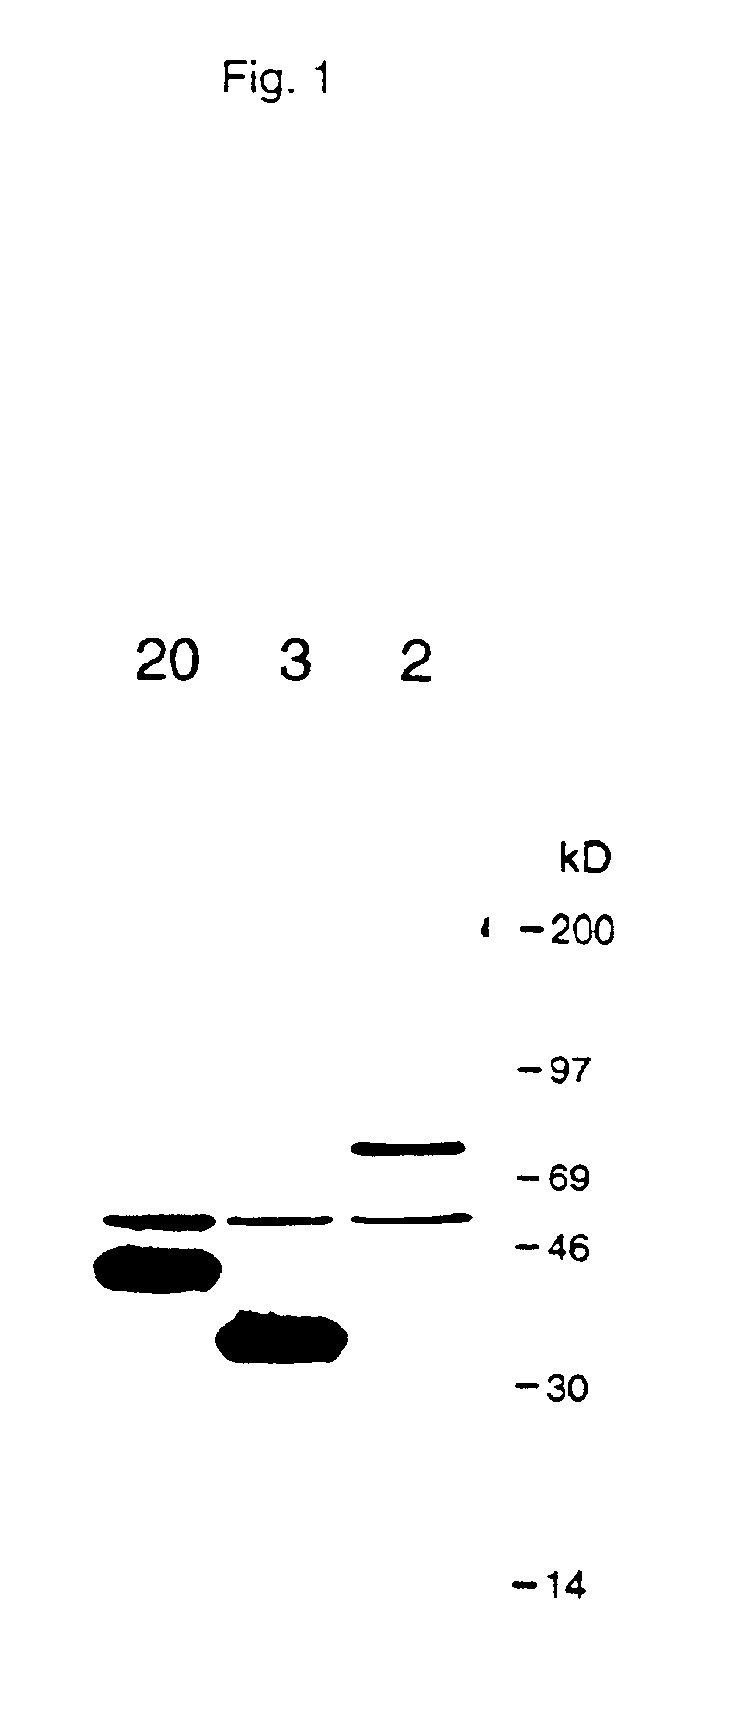 TNF receptor death domain ligand proteins and inhibitors of ligand binding